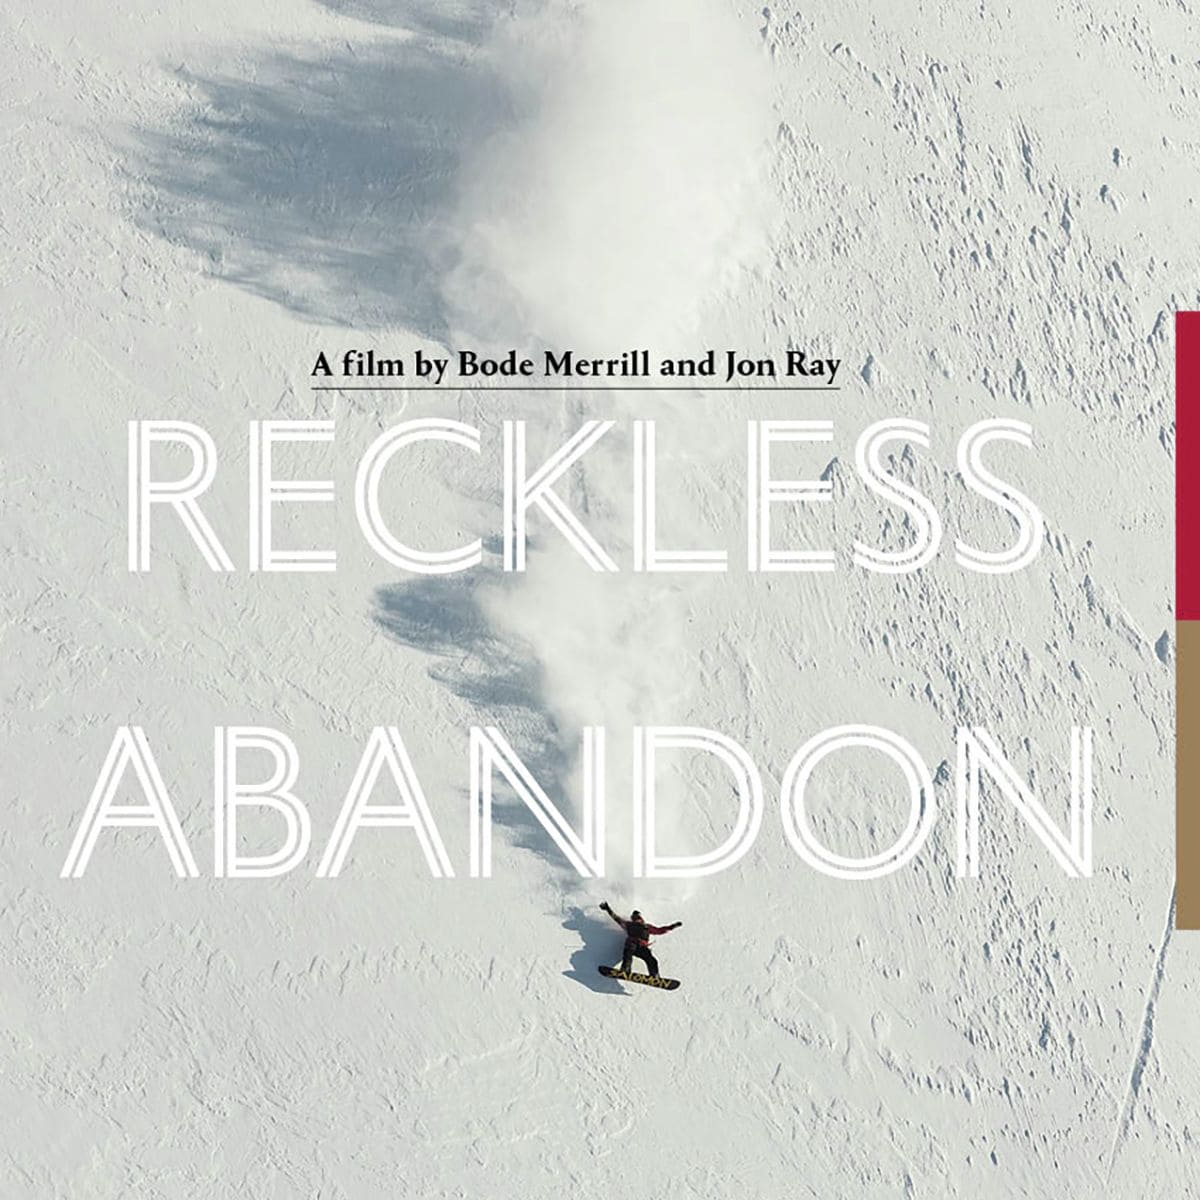 Salomon Snowboards Reckless Abandon DVD A Film by Bode Merrill and Jon Ray GWP